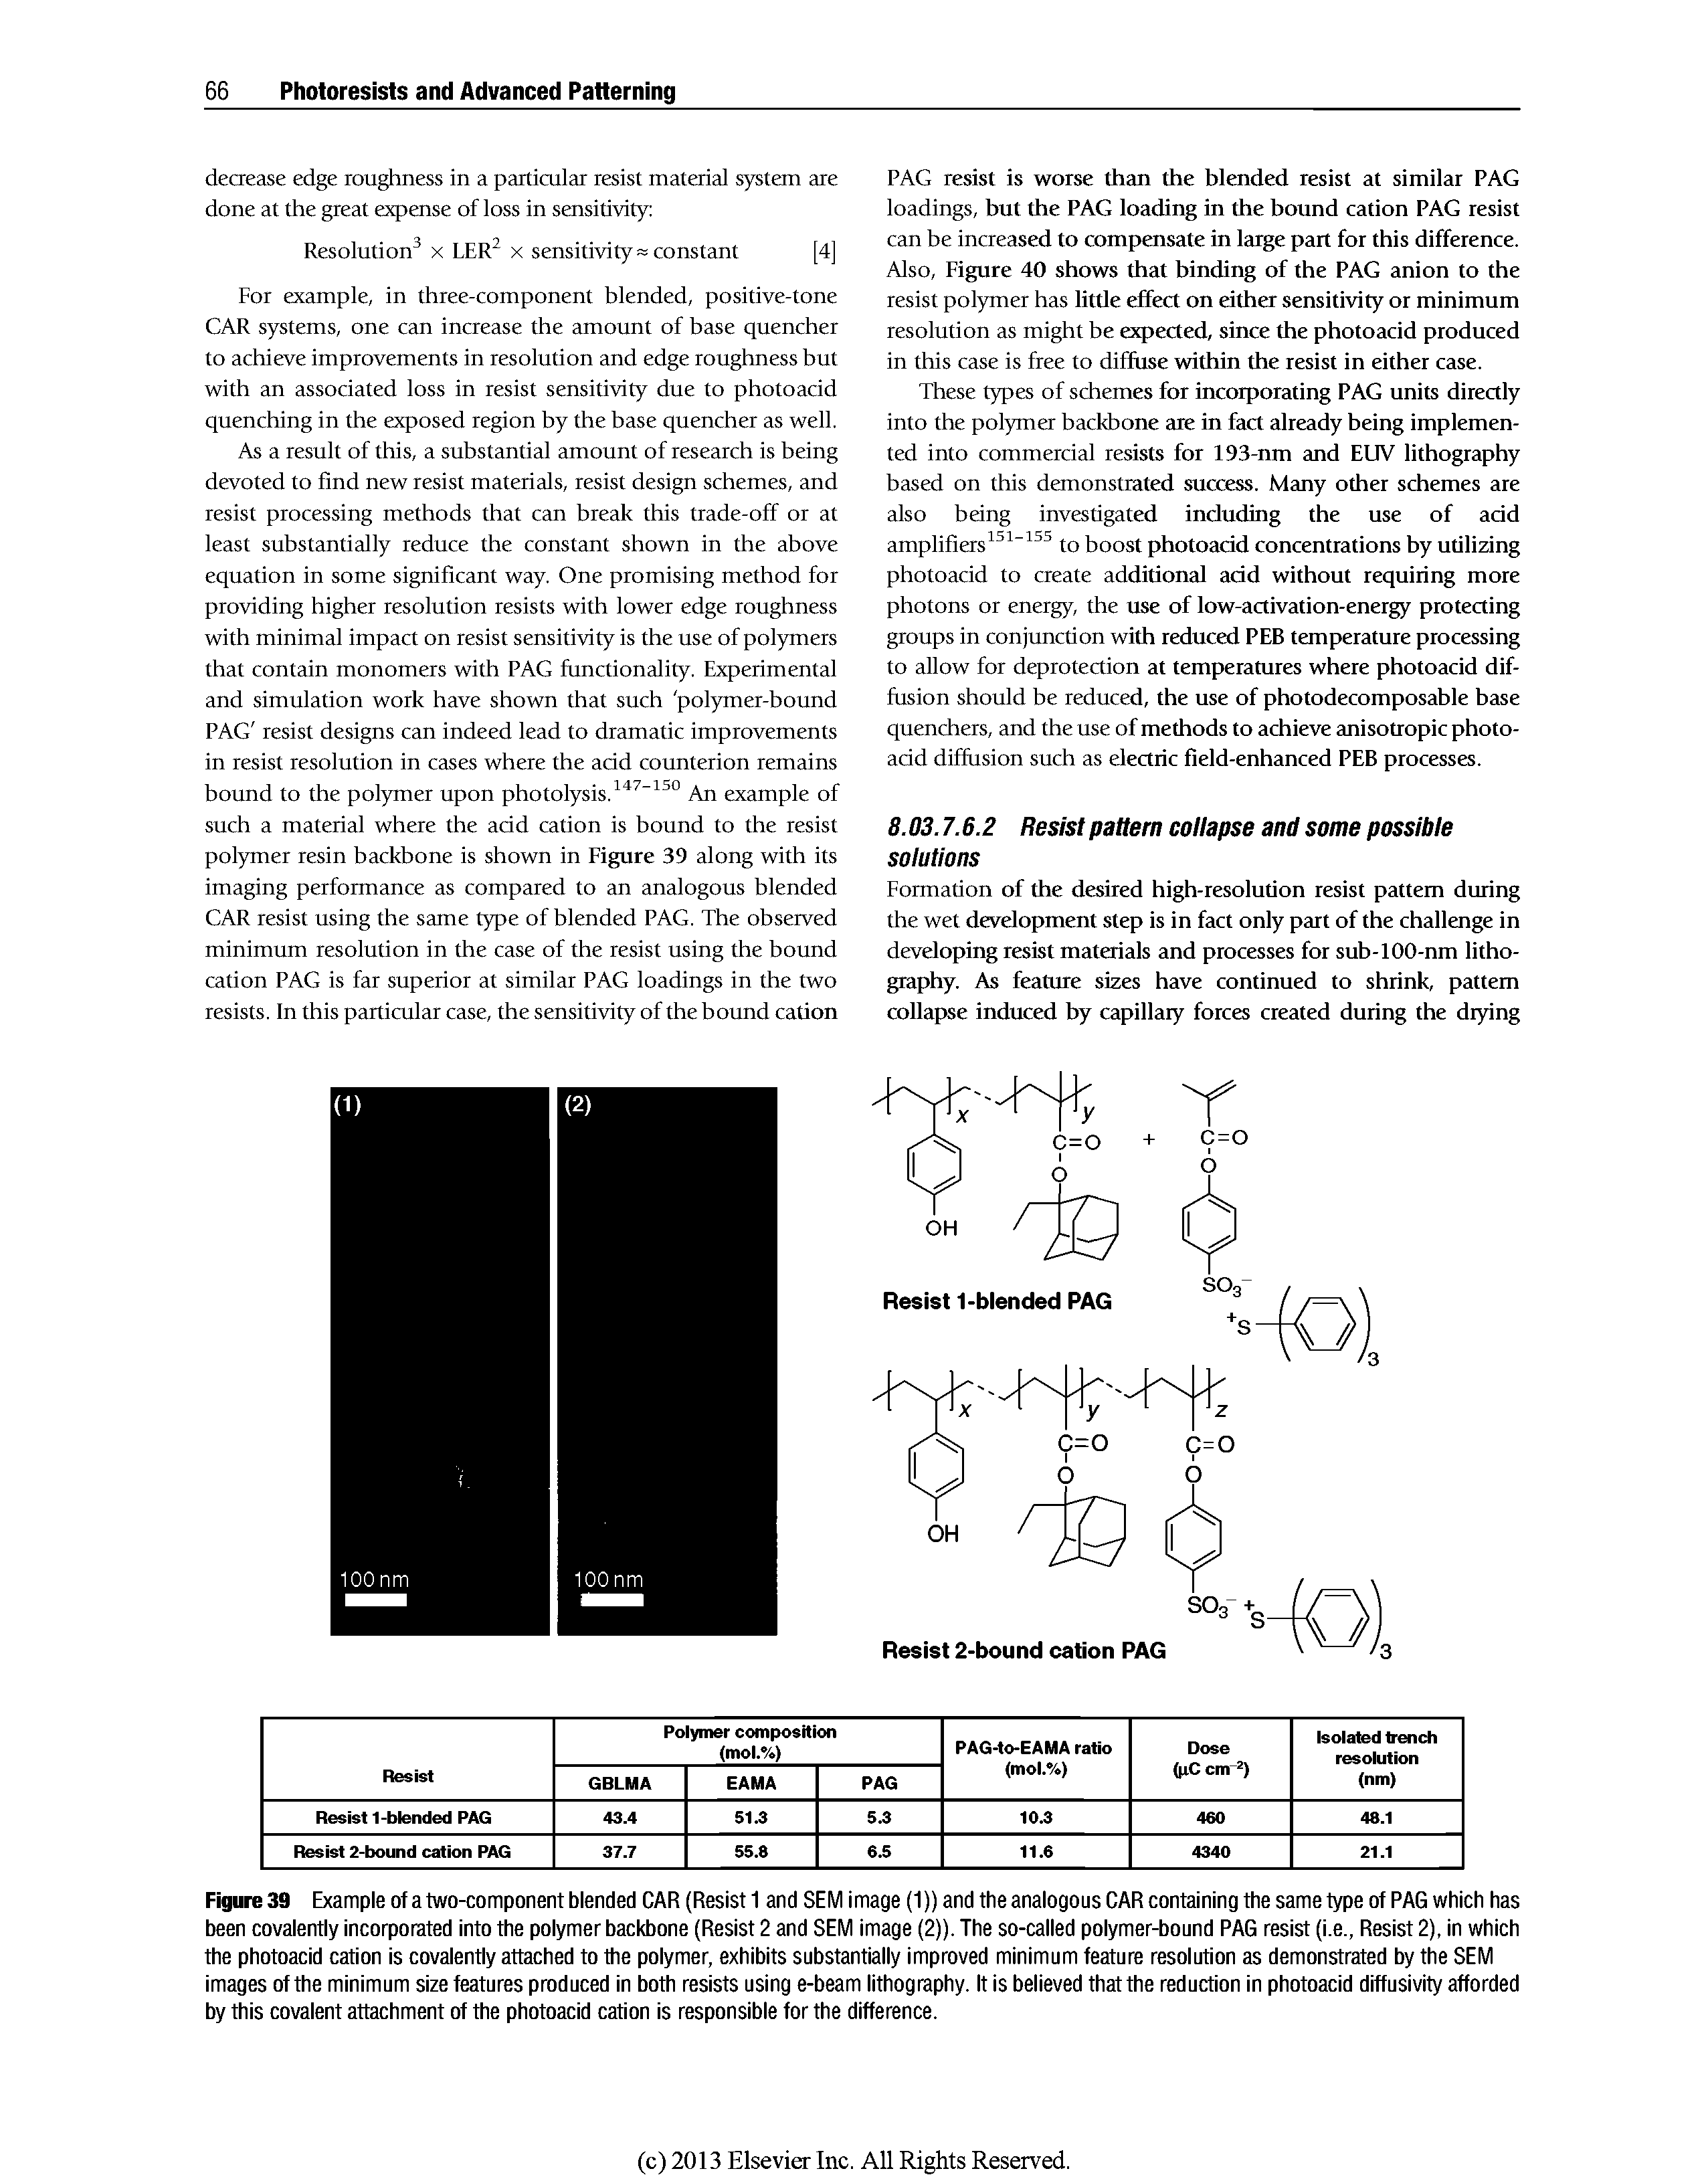 Figure 39 Example of a two-component blended CAR (Resist 1 and SEM image (1)) and the analogous CAR containing the same type of PAG which has been covalently incorporated into the polymer backbone (Resist 2 and SEM image (2)). The so-called polymer-bound PAG resist (i.e., Resist 2), in which the photoacid cation is covalently attached to the polymer, exhibits substantially improved minimum feature resolution as demonstrated by the SEM images of the minimum size features produced in both resists using e-beam lithography. It Is believed that the reduction in photoacid diffusivity afforded by this covalent attachment of the photoacid cation is responsible for the difference.